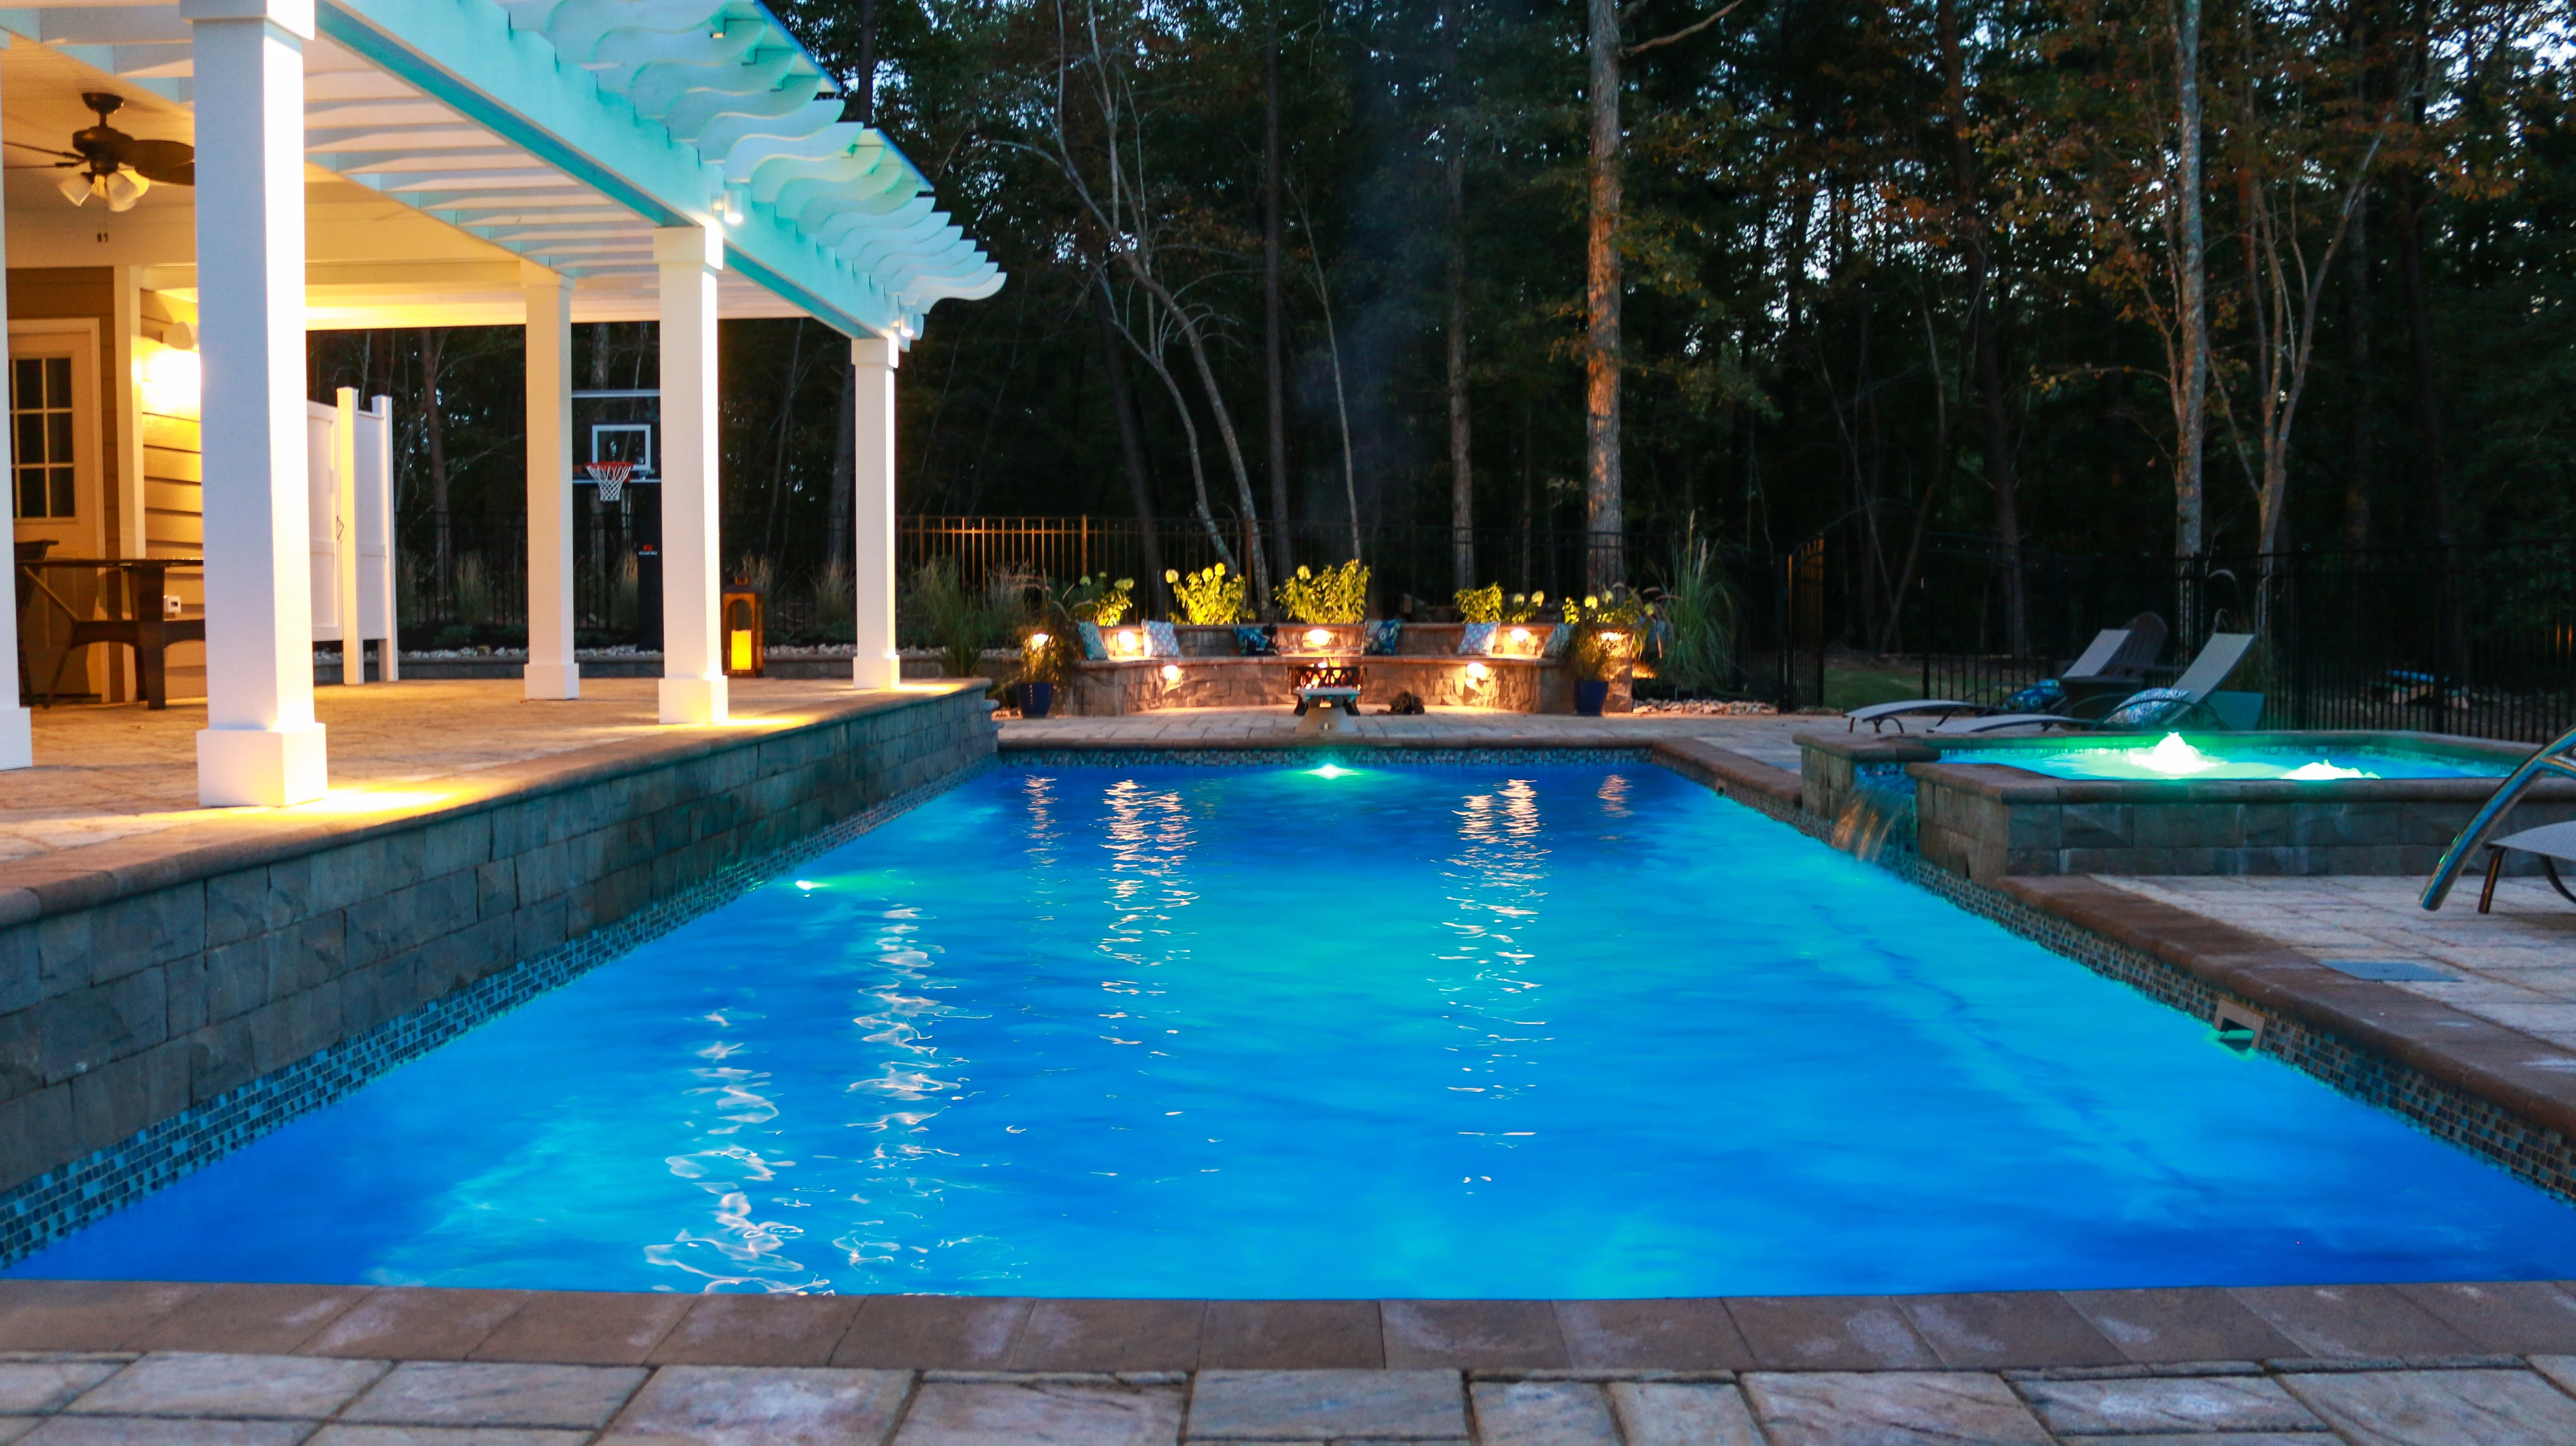 Pool, Spa, or Both? How to Decide What Option Is Best for Your Yard